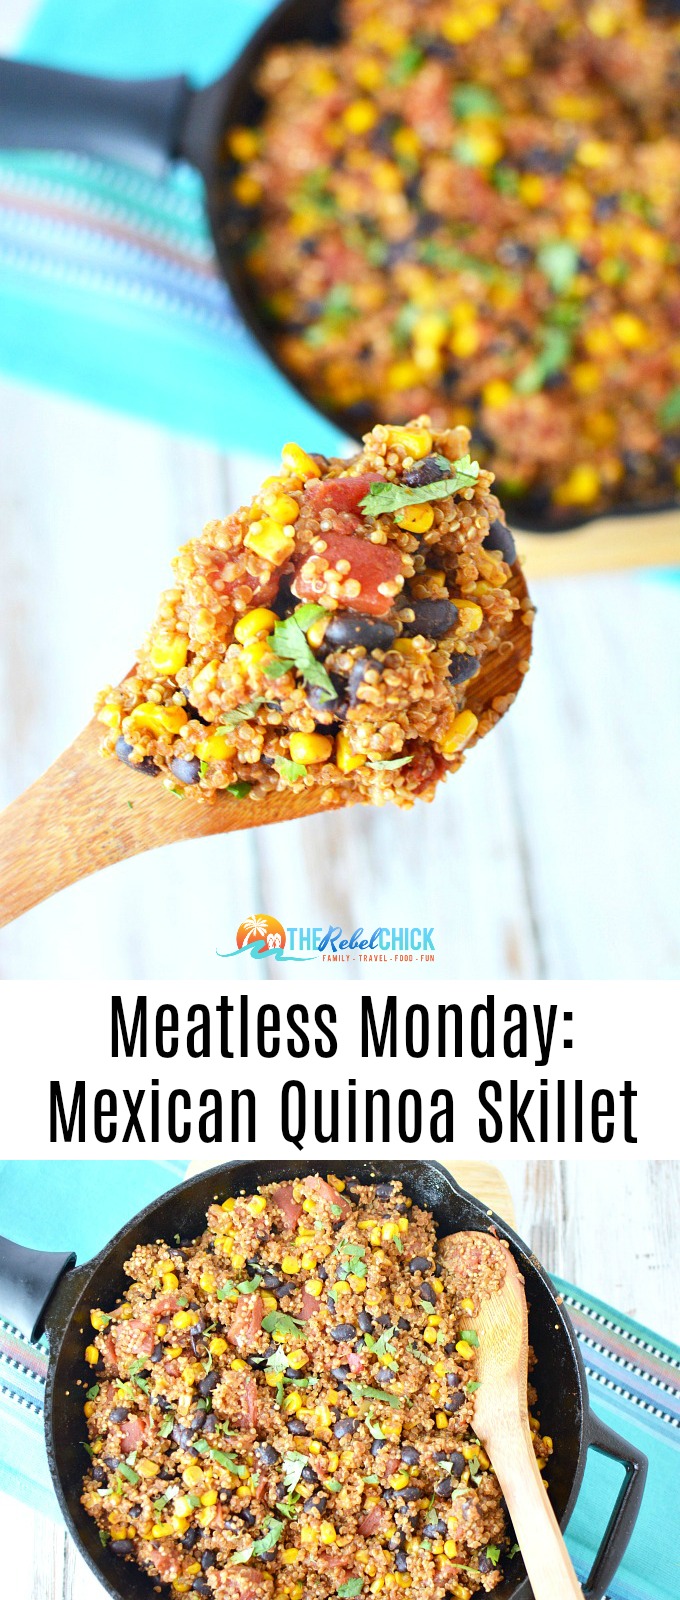 Meatless Monday: Mexican Quinoa Skillet